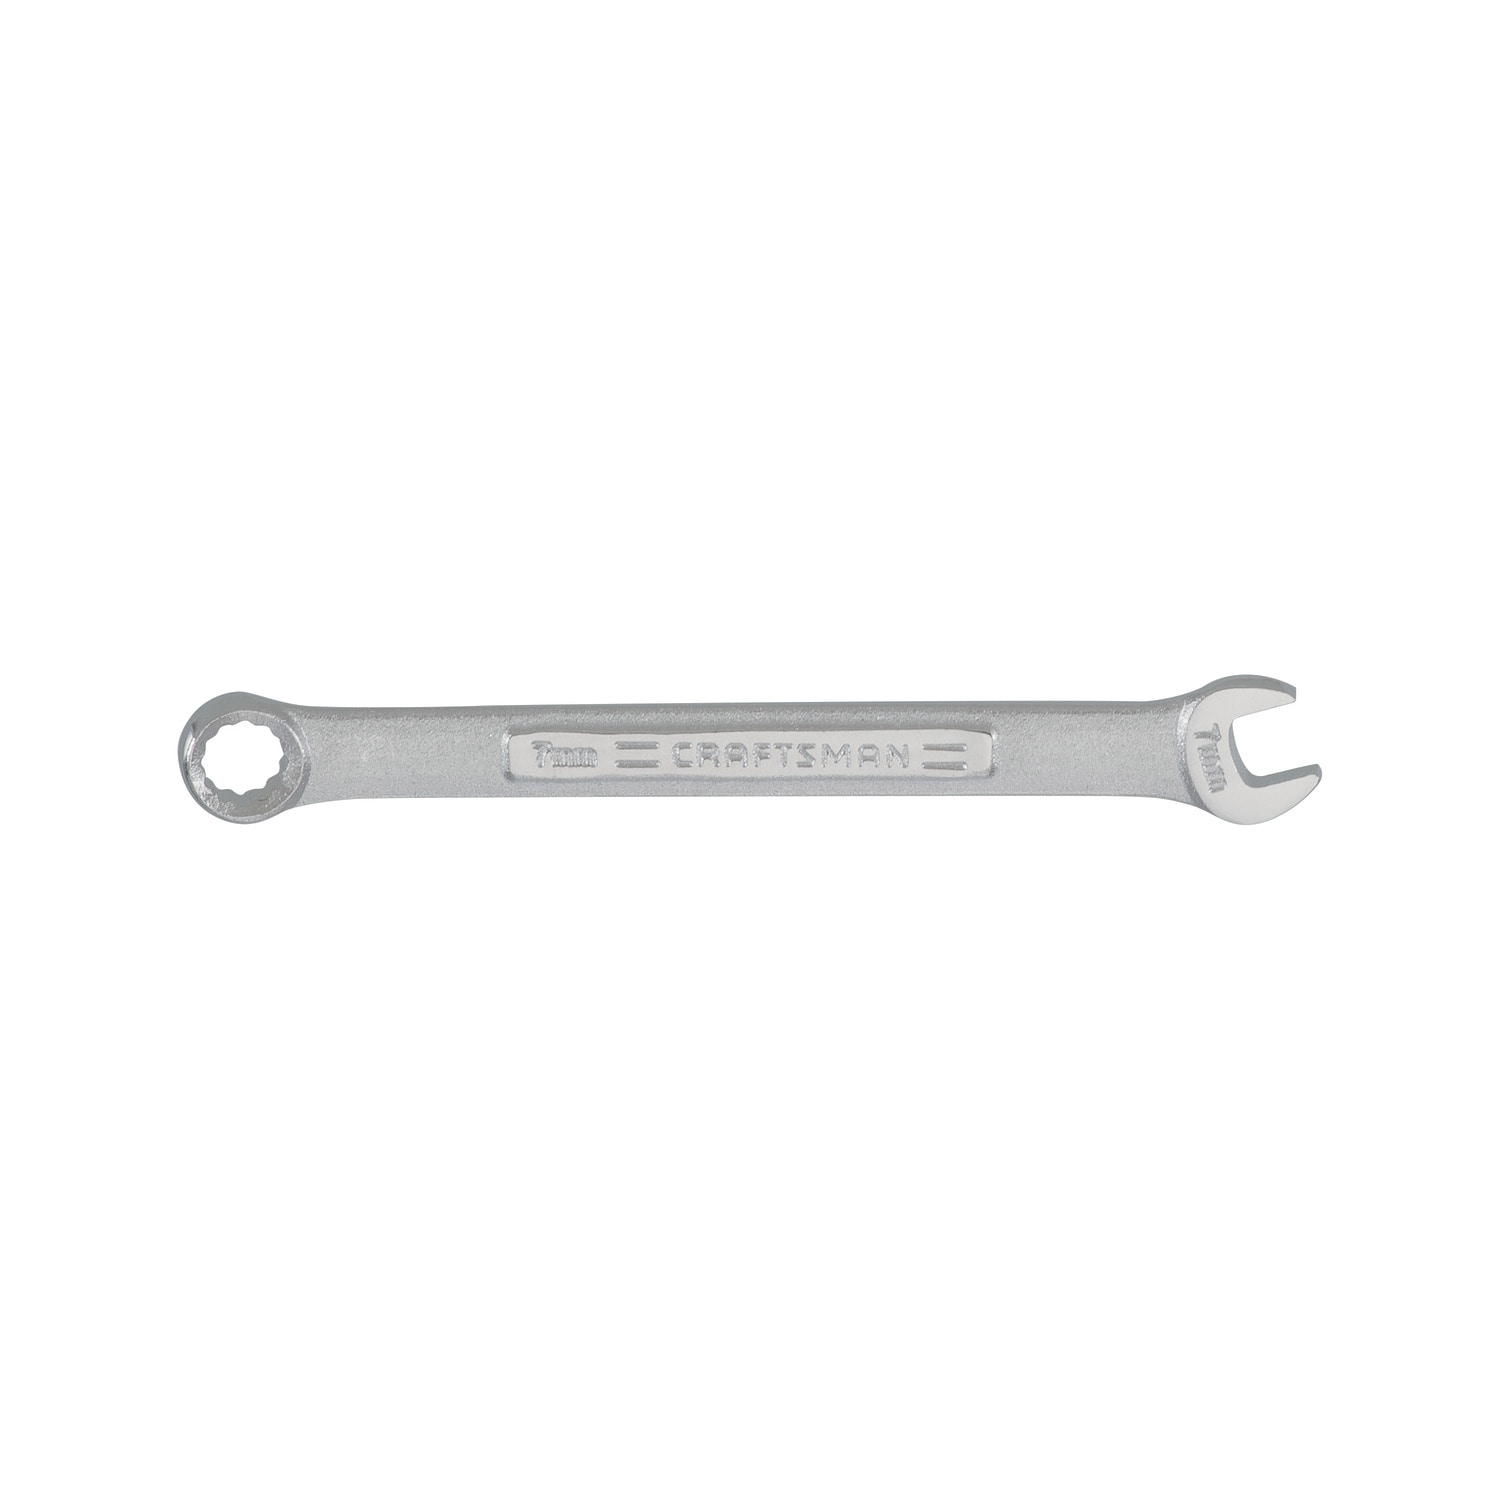 CRAFTSMAN 7Mm 12-point Metric Combination Wrench in the